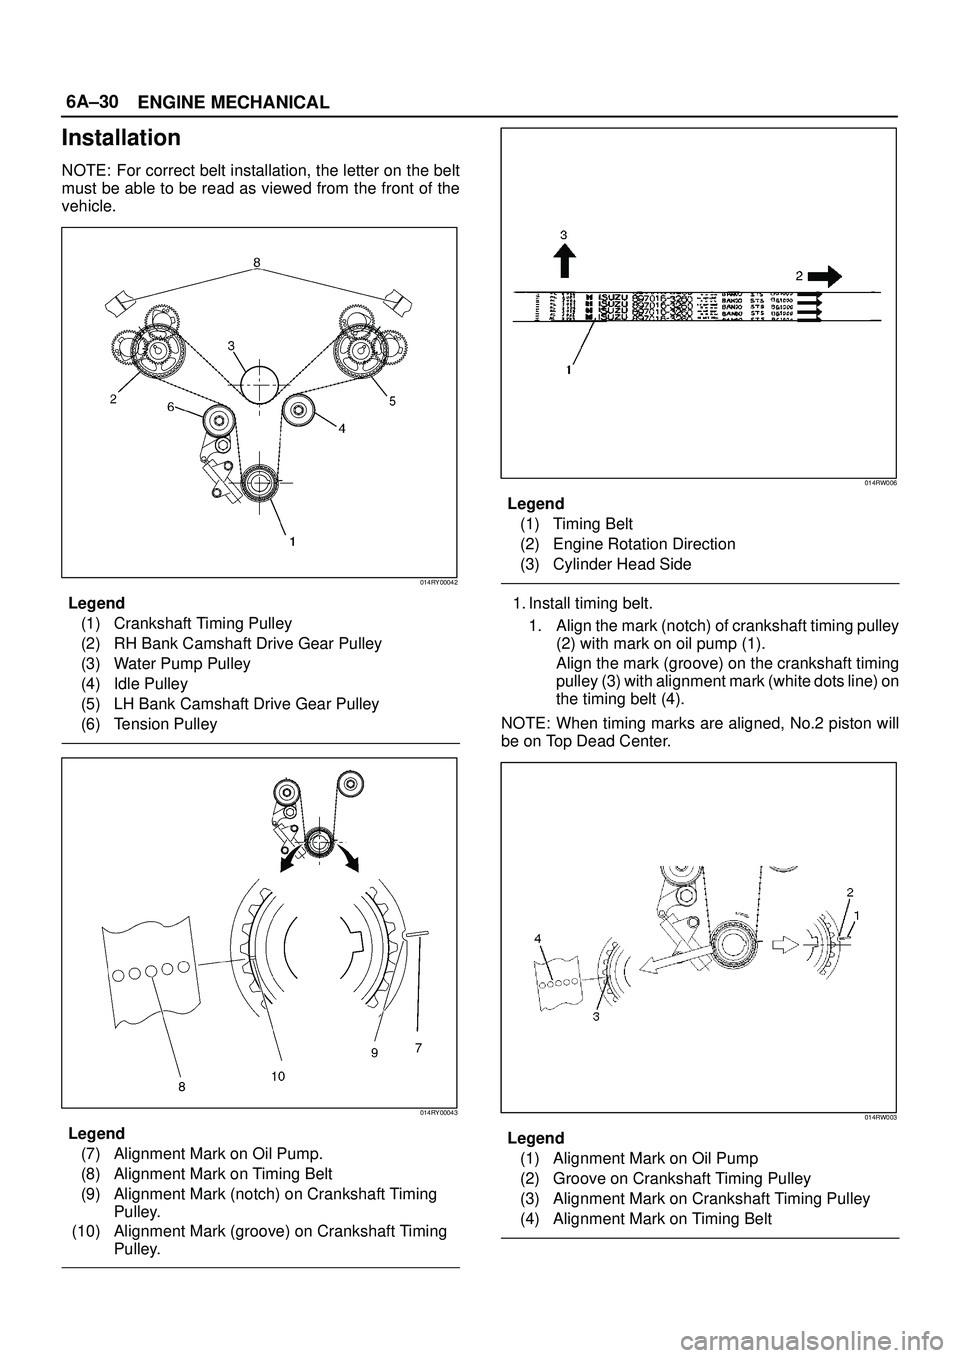 ISUZU TROOPER 1998  Service Repair Manual 6A±30
ENGINE MECHANICAL
Installation
NOTE: For correct belt installation, the letter on the belt
must be able to be read as viewed from the front of the
vehicle.
014RY00042
Legend
(1) Crankshaft Timi